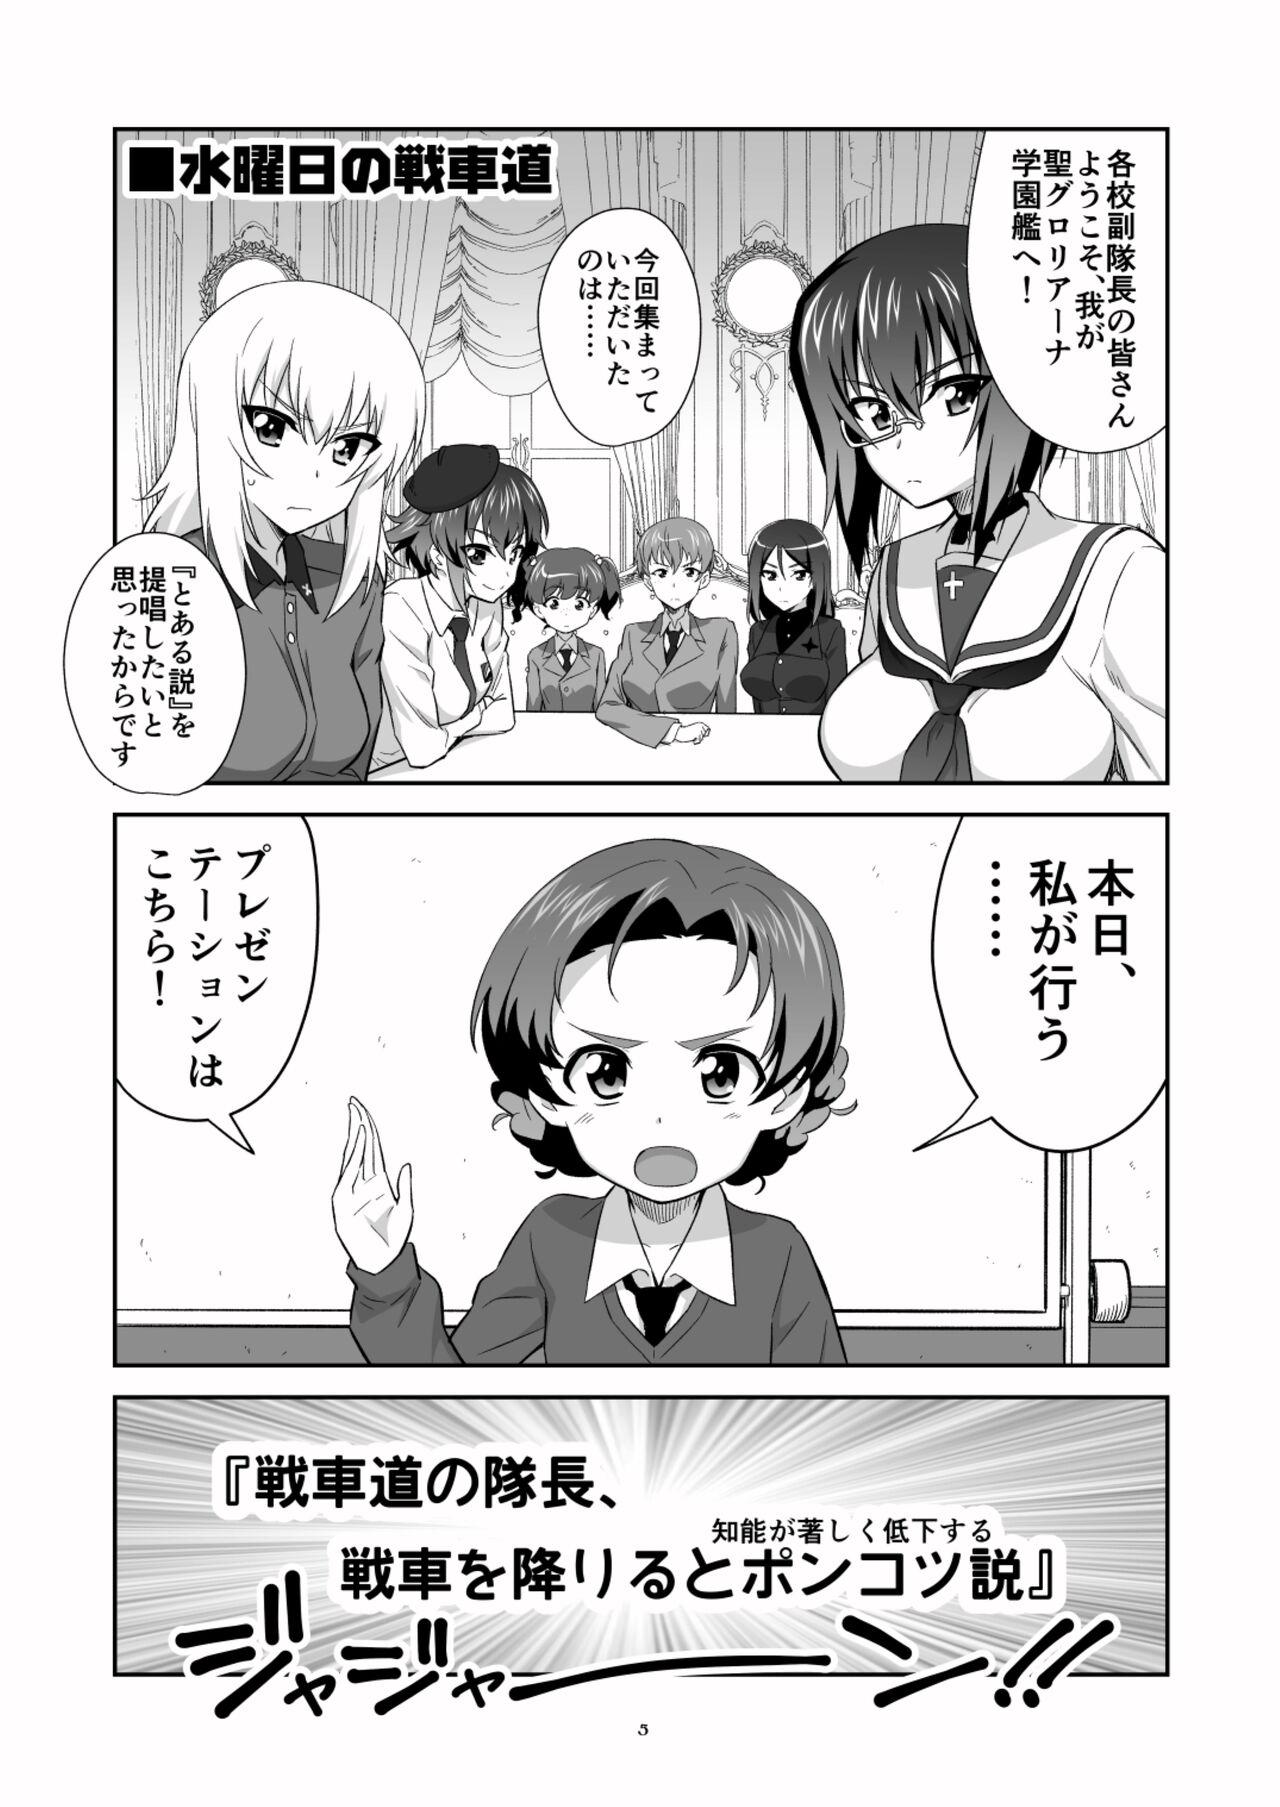 Toes TURIME-DO 4 - Girls und panzer Short Hair - Page 5